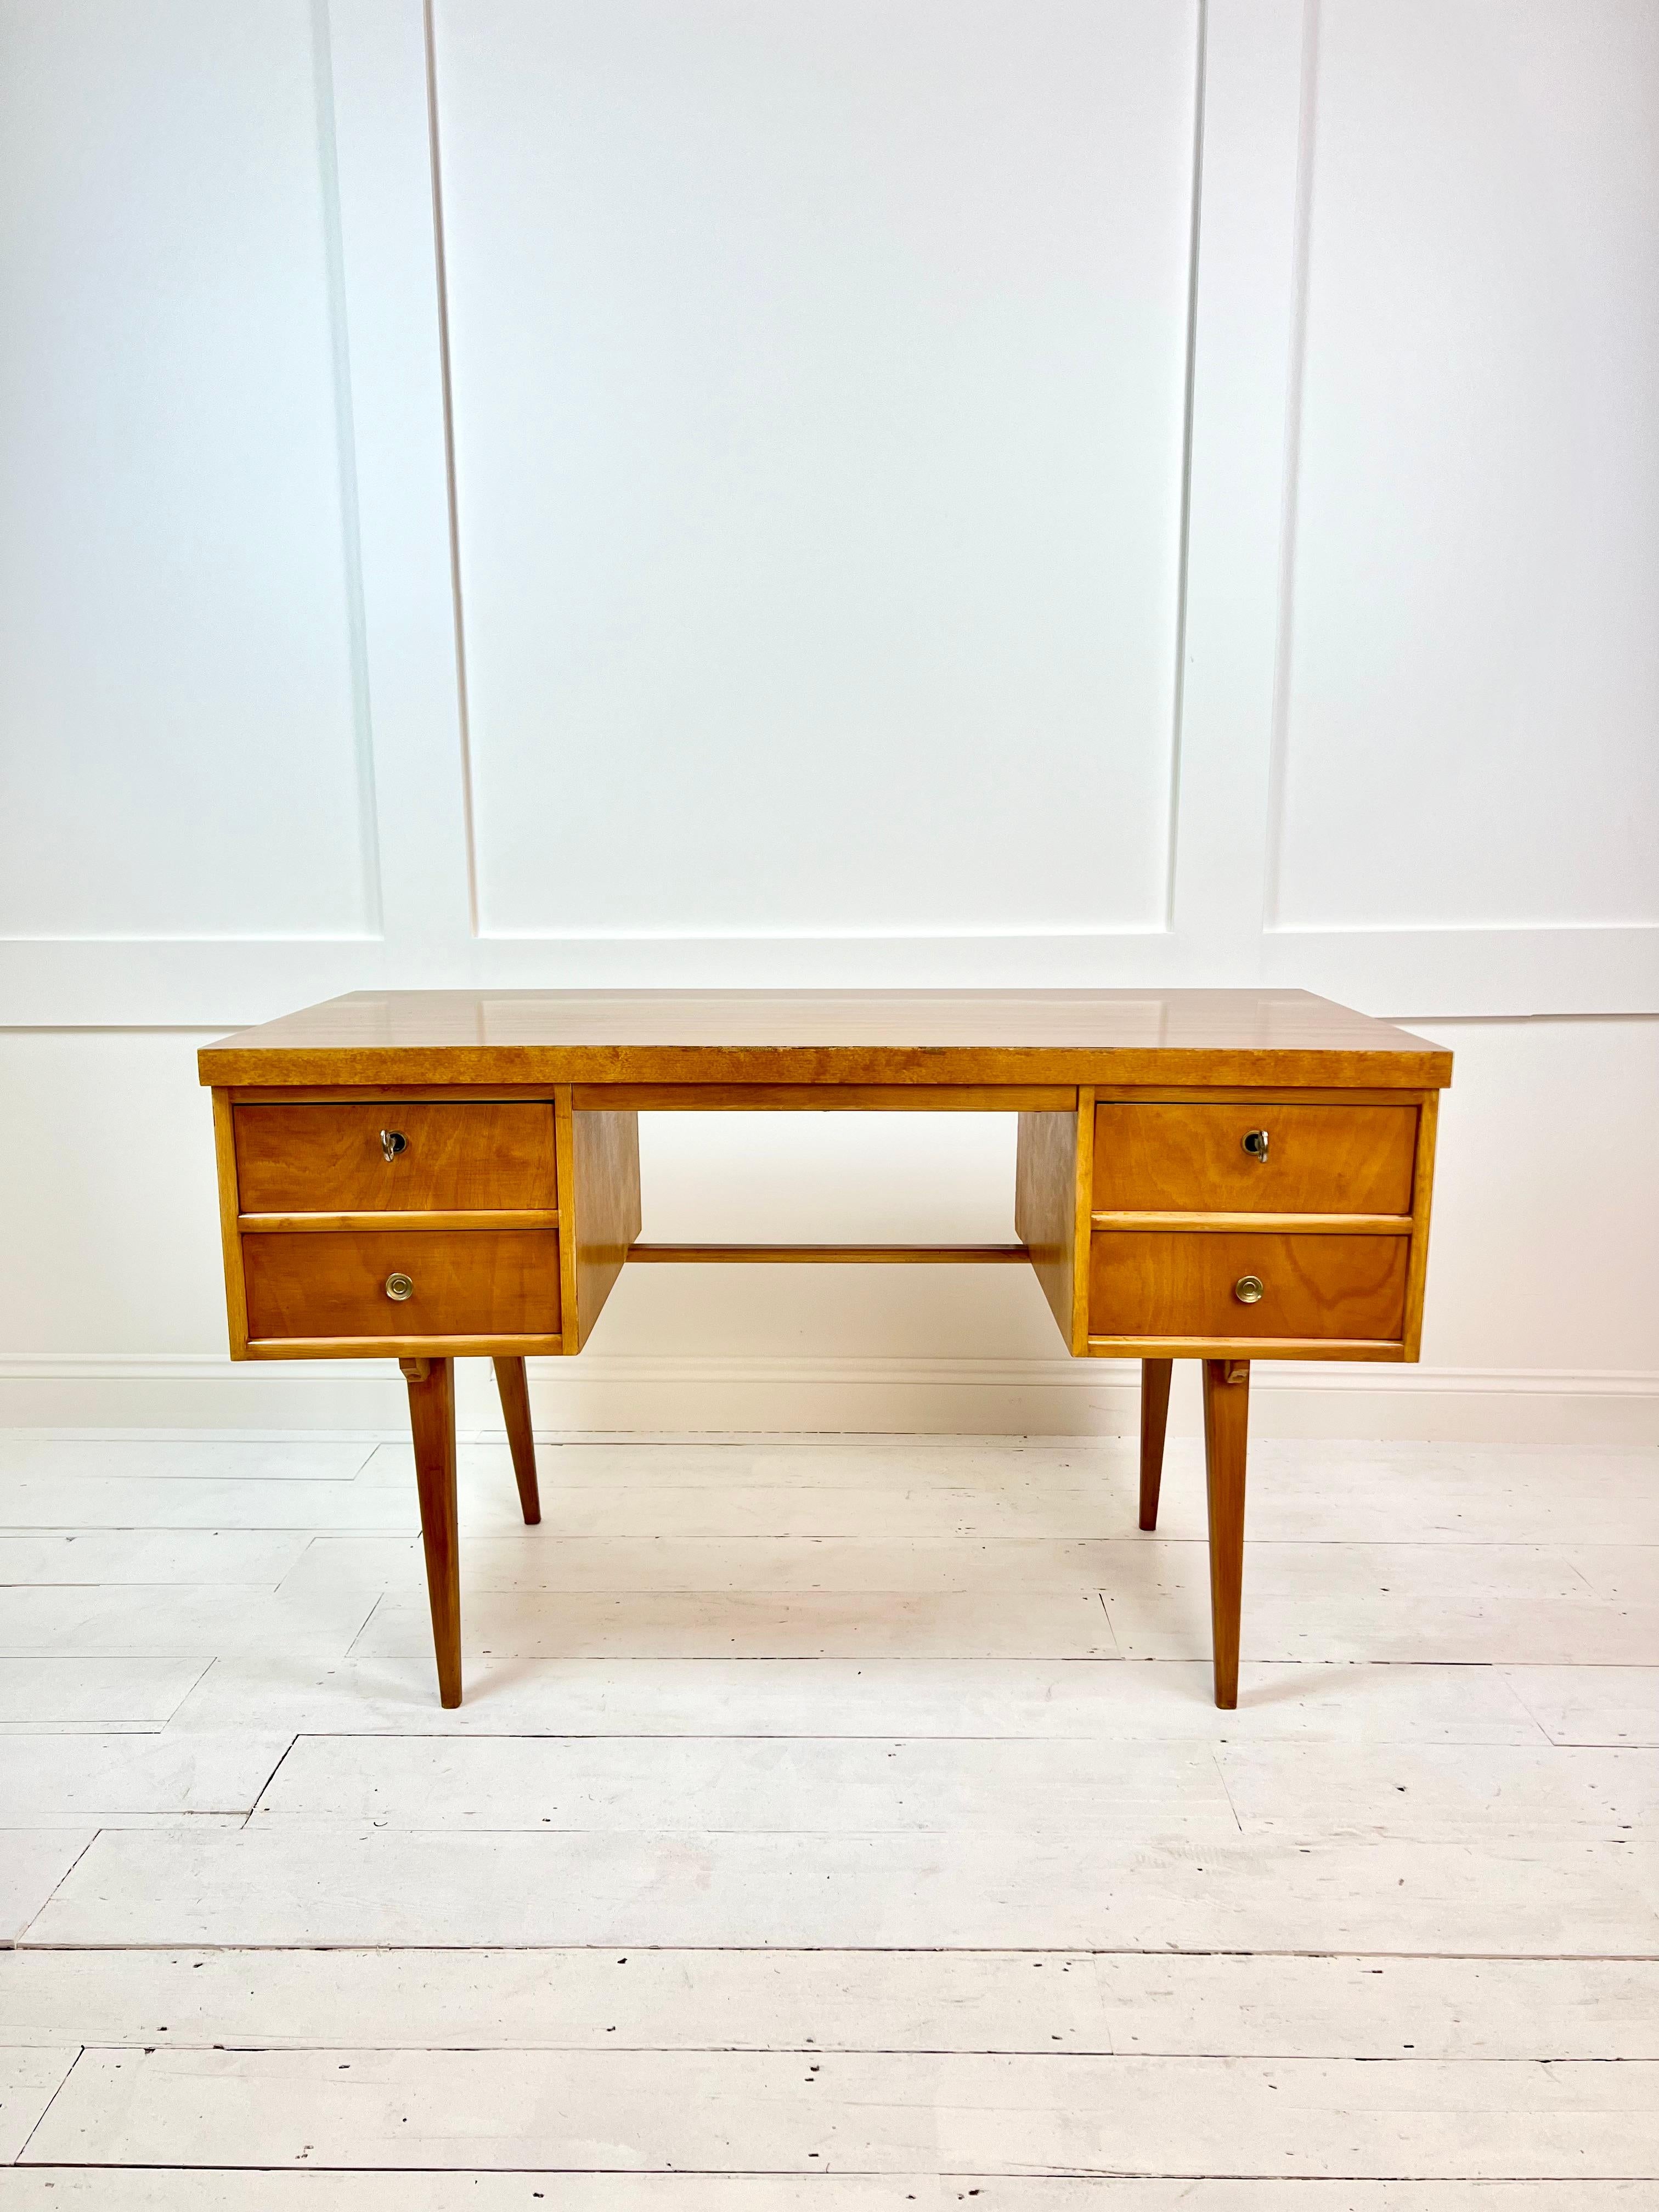  An unusual style Mid-Century Modern, solid Beech & veneer desk, crafted by Ekawerk Horn-Lippe in East Germany in the 1960's. This inventive design piece features sleek lines and a beautiful combination of solid beech wood and veneer construction,